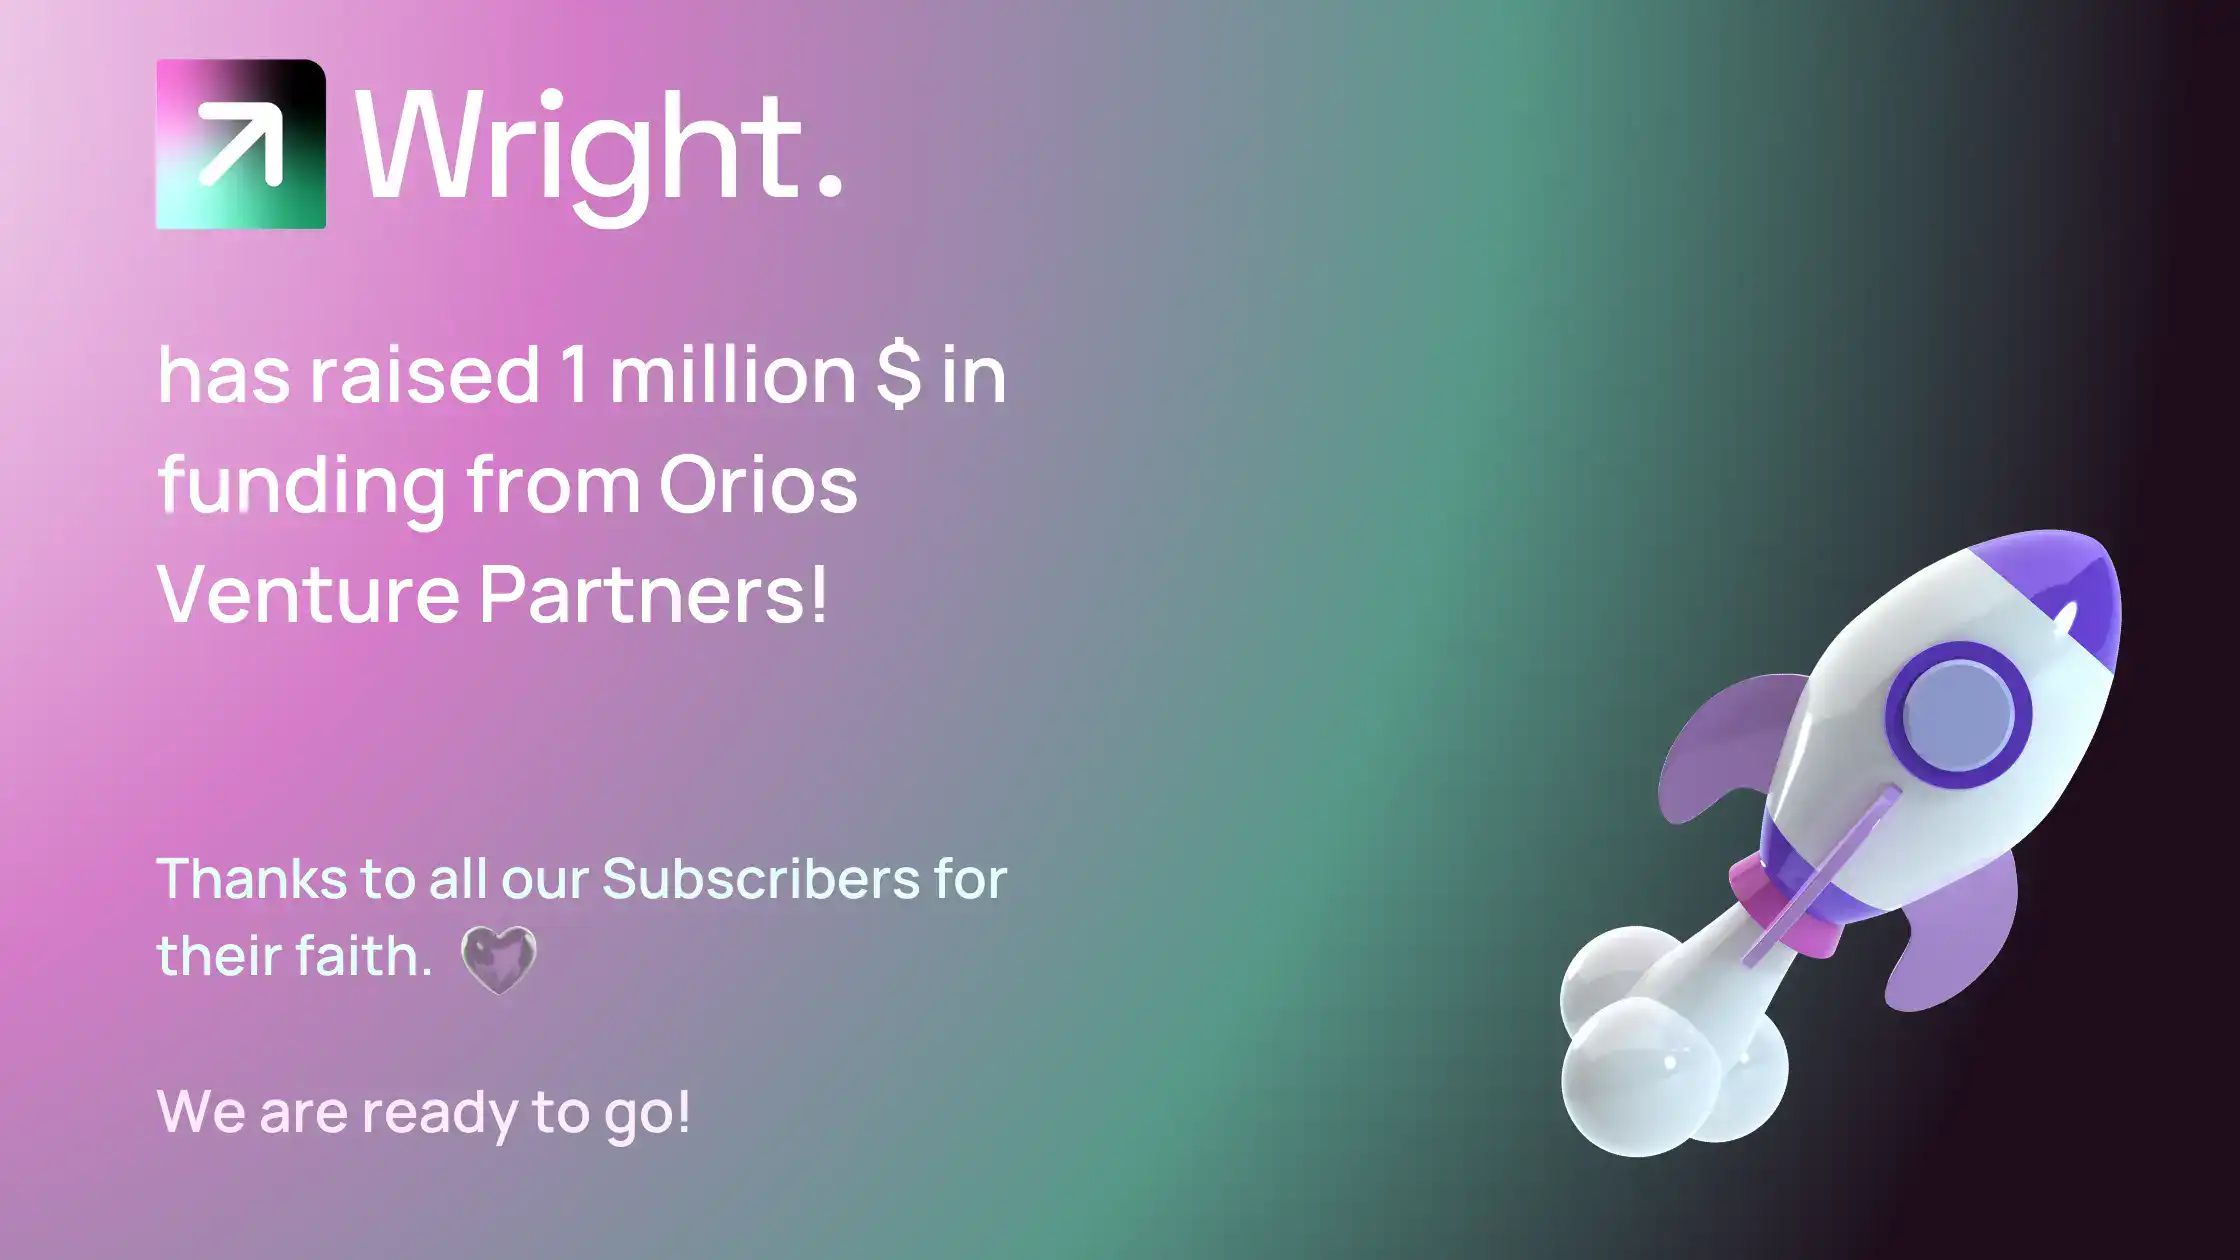 We have raised 1M$ in funding from Orios Ventures